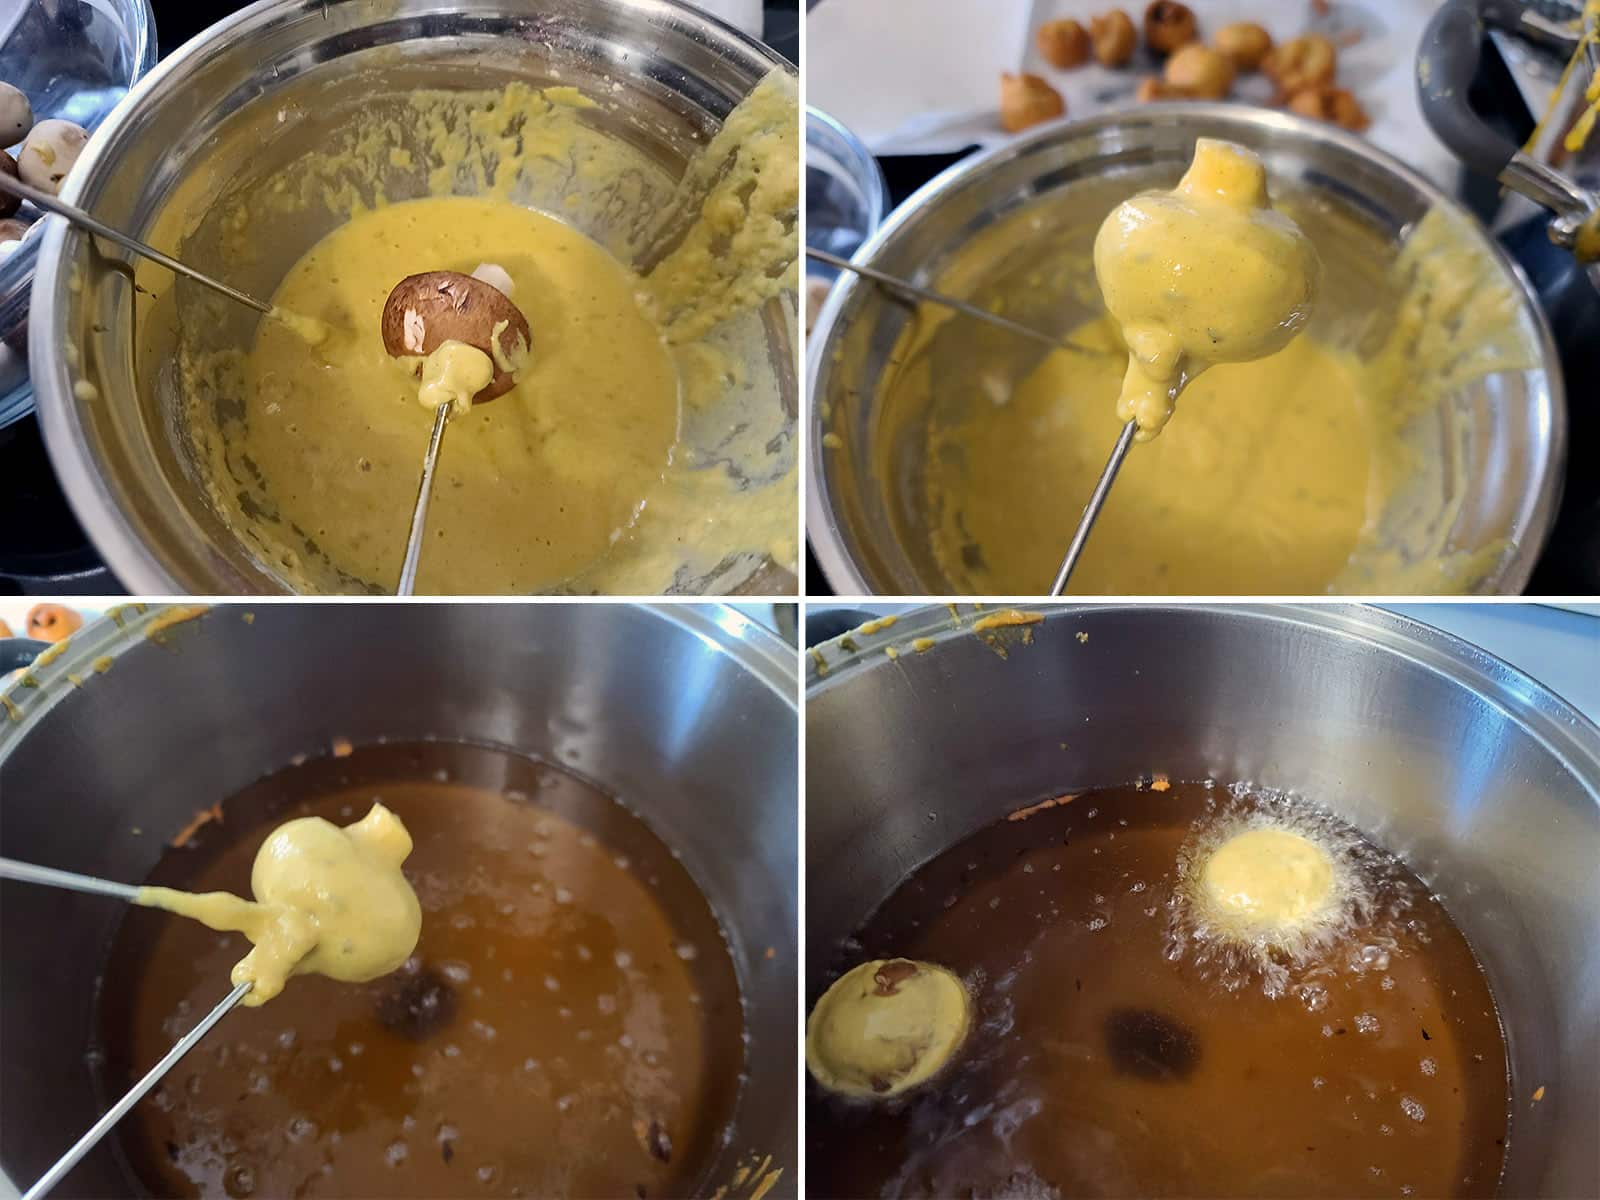 A 4 part image showing a mushroom being dipped n batter and deep fried.